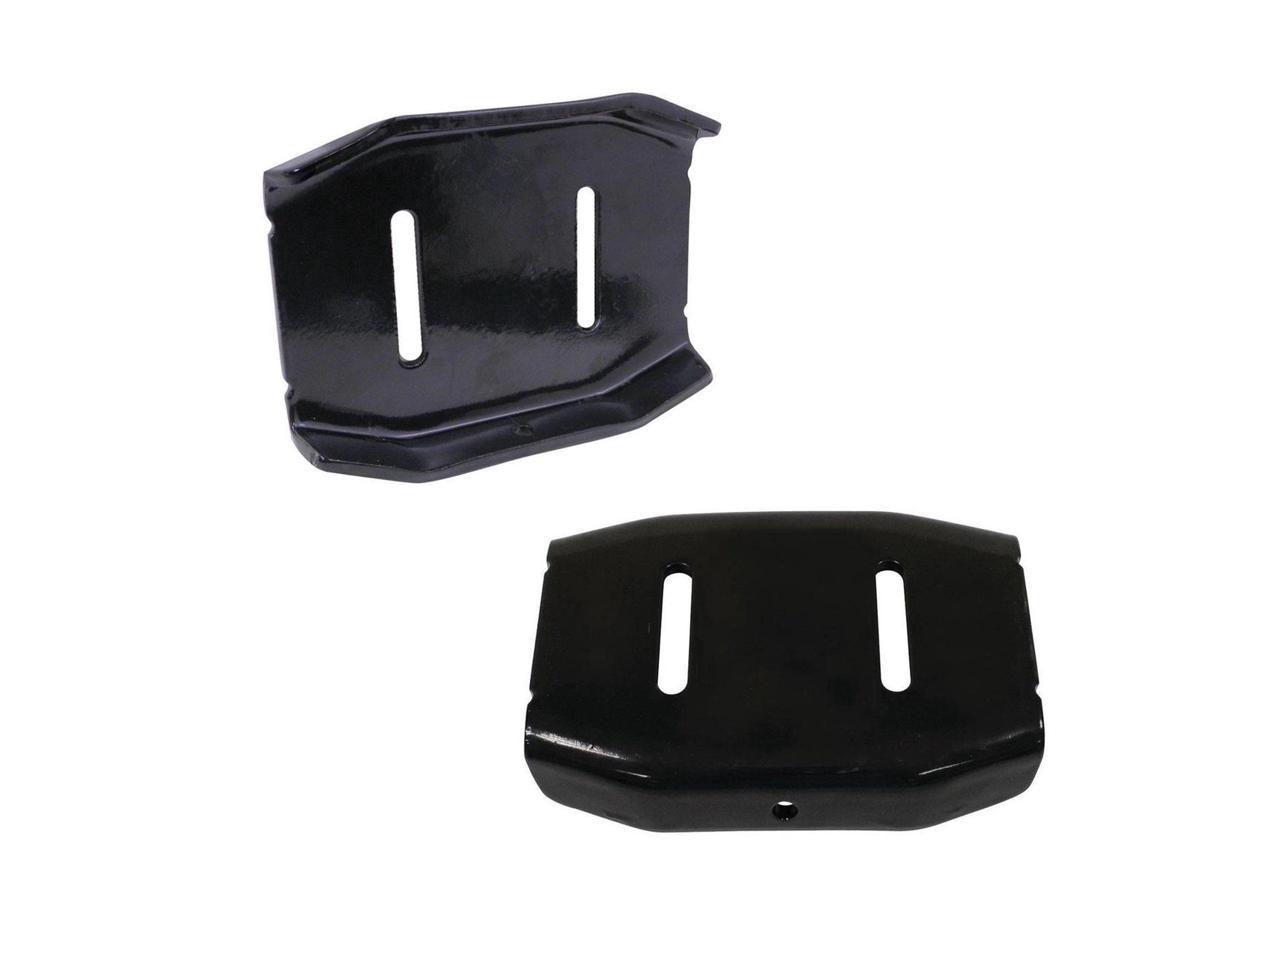 Outdoor Power Deals Skid Shoe Set of 2 Replaces 532407834 532435785 for Snowblower Snow Thrower